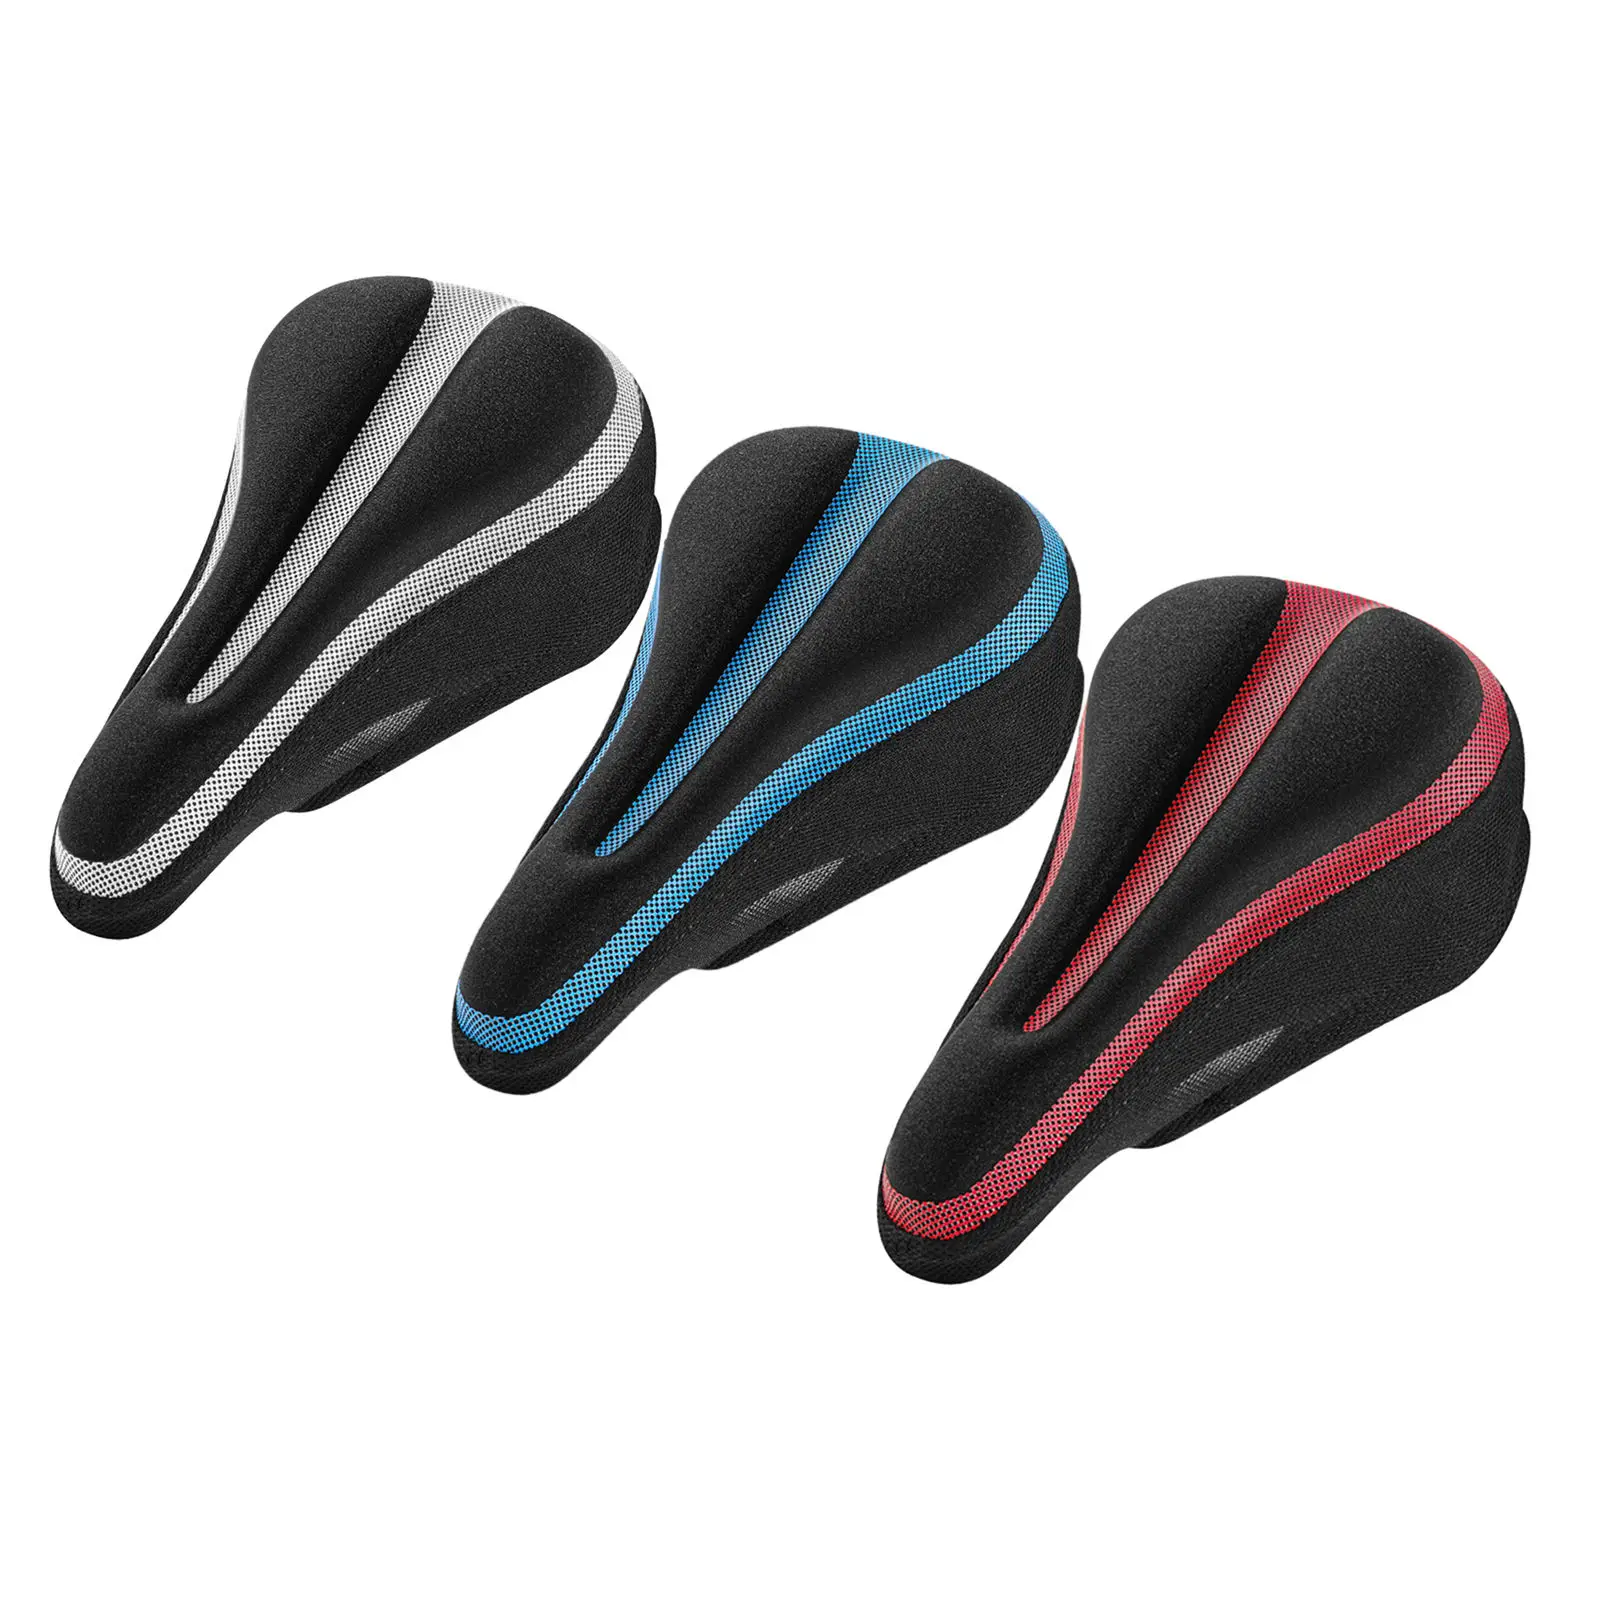 Bike EXTRA Comfort Soft Gel Pad Comfy Cushion Saddle Seat Cover Cycle Bicycle